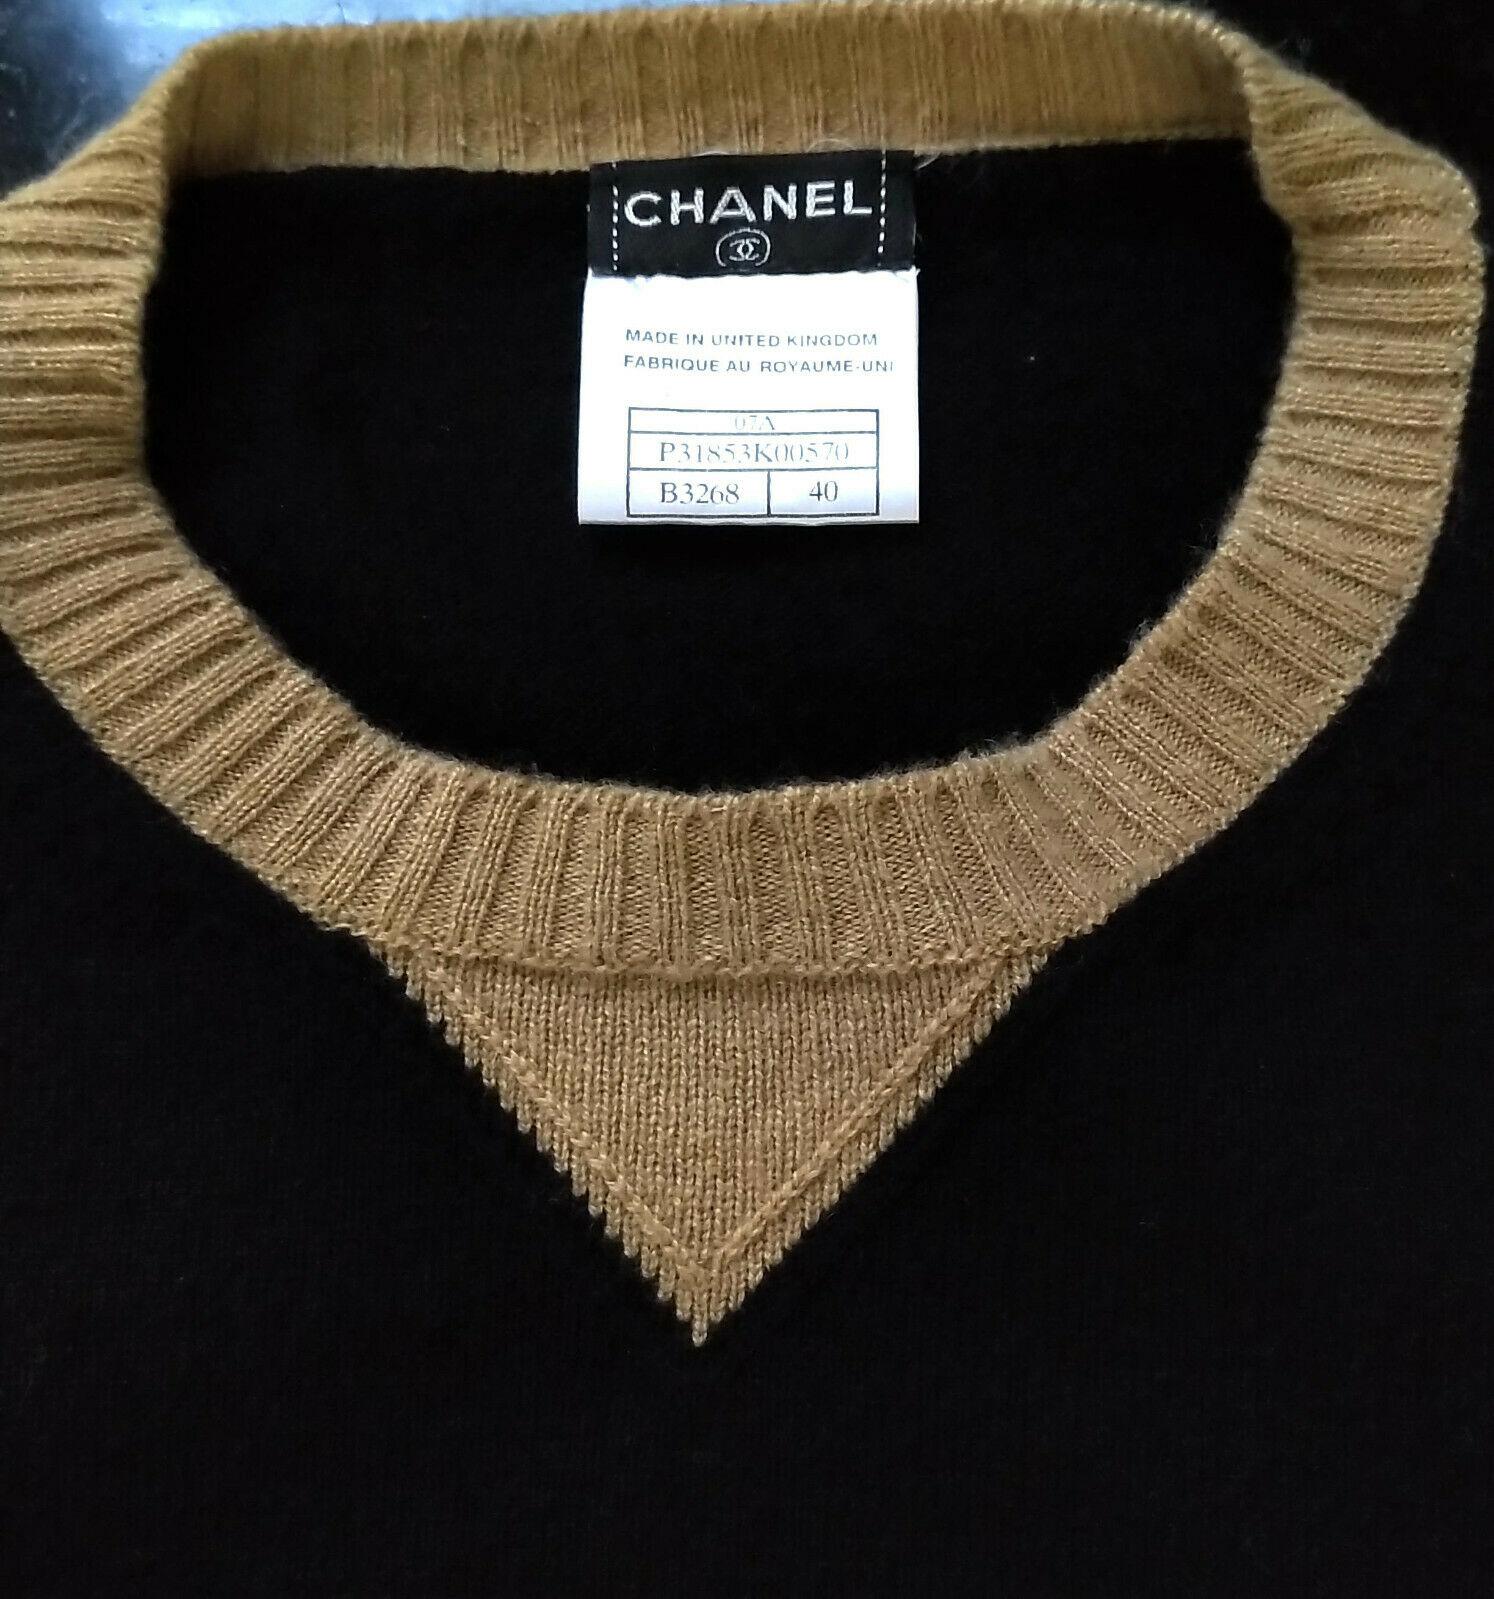 Chanel 2007 07A Coco Camellia Crest Black & Tan Cashmere Sweater Top FR 40/ US 6 4